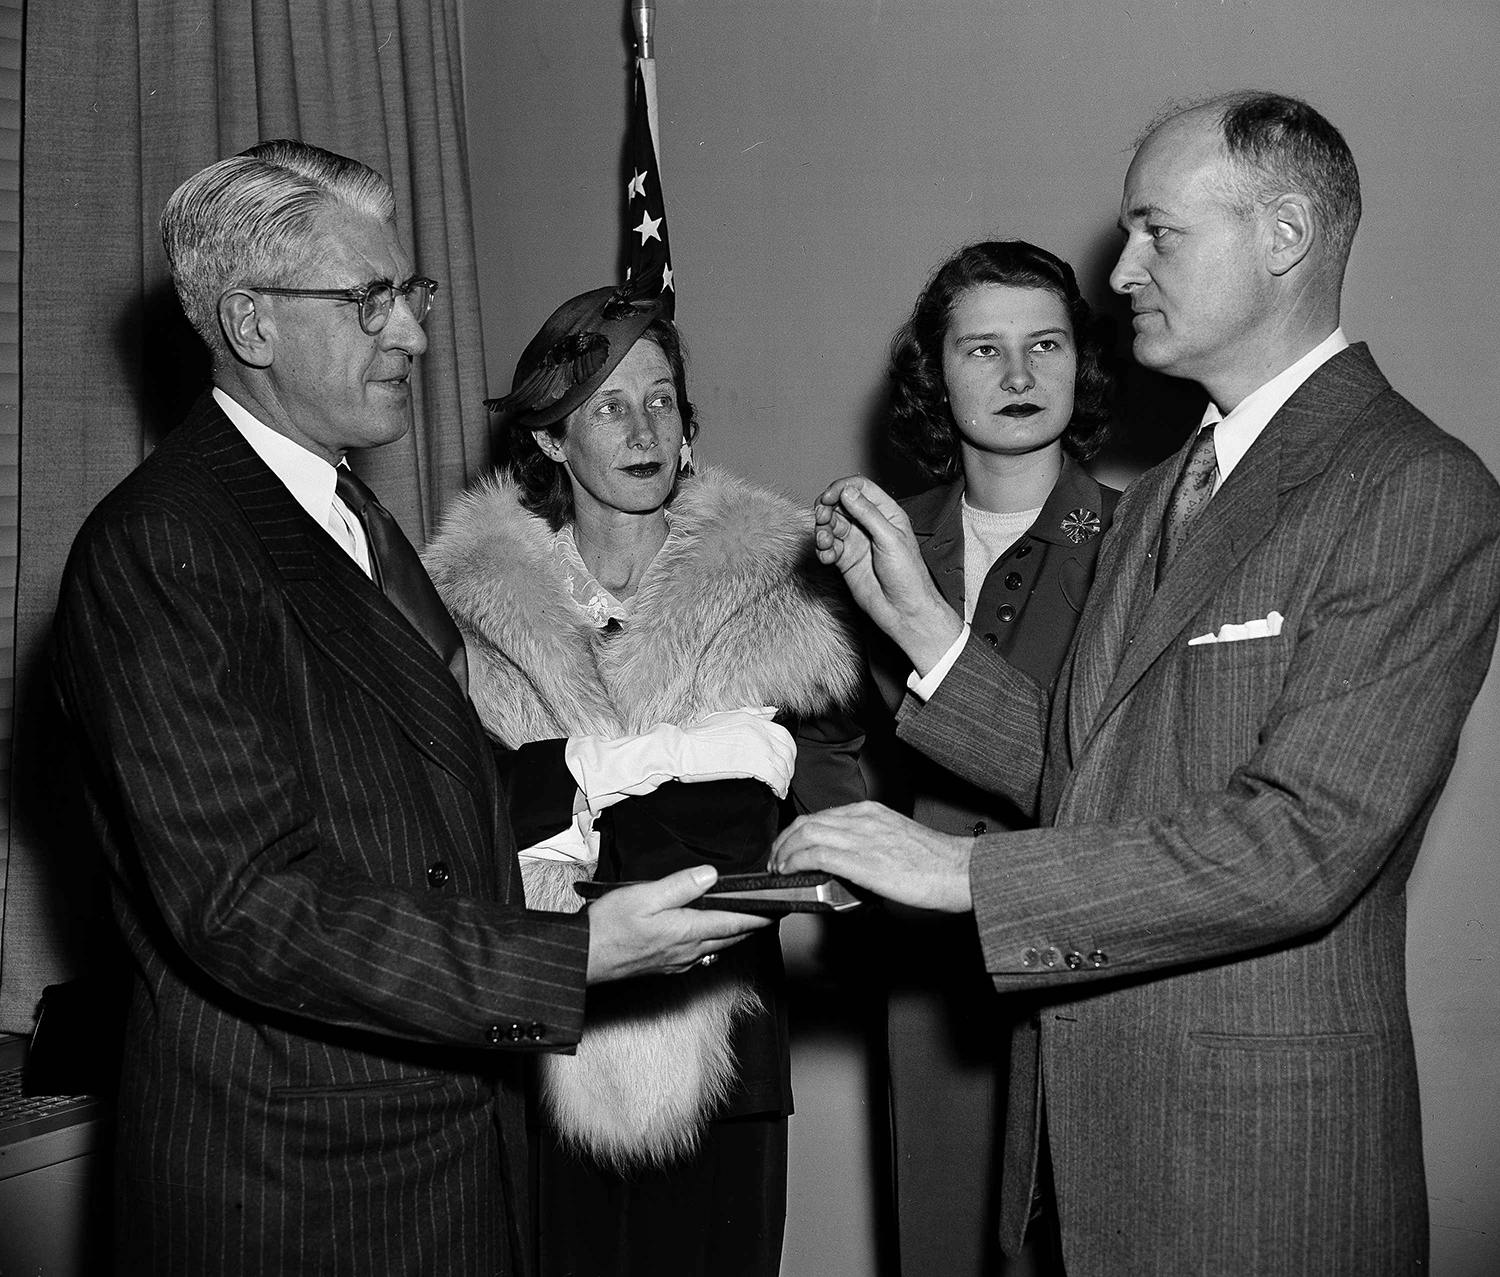 George F. Kennan becomes Ambassador to the Soviet Union in a State Department ceremony April 2, 1952. Kennan, left, reenacts the swearing in by Raymond Muir, protocol officer, with Mrs. Kennan (second from left), and daughter Grace, 19, looking on. (AP Photo/Byron Rollins)